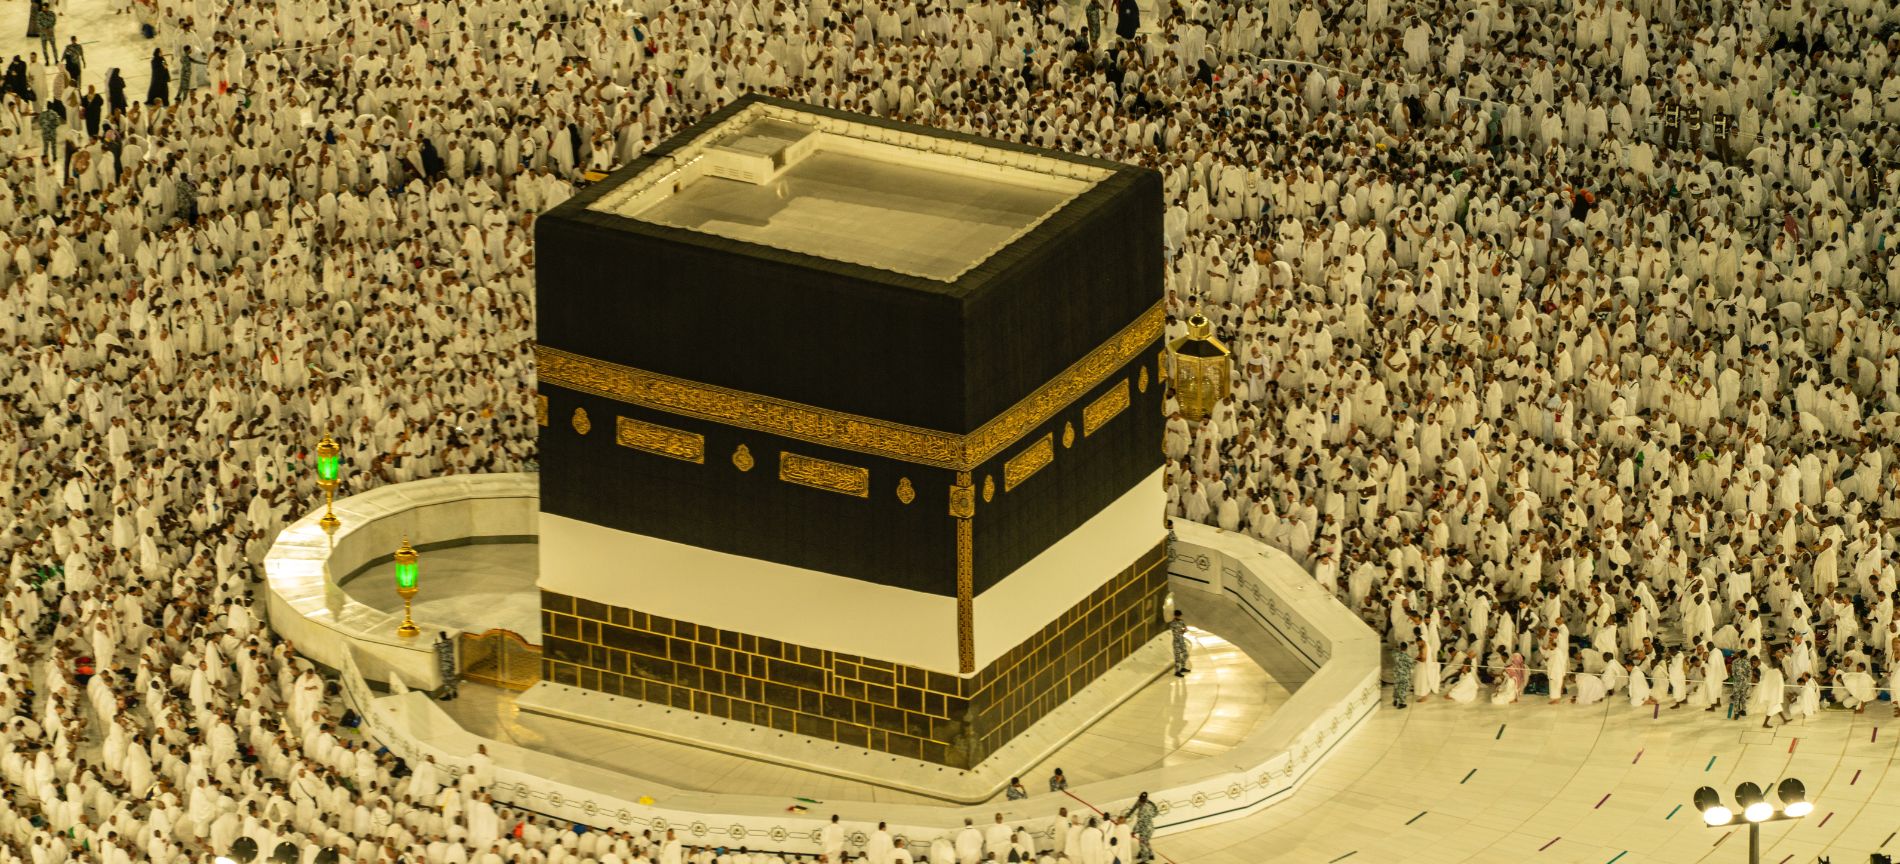 A step-by-step guide to performing Umrah